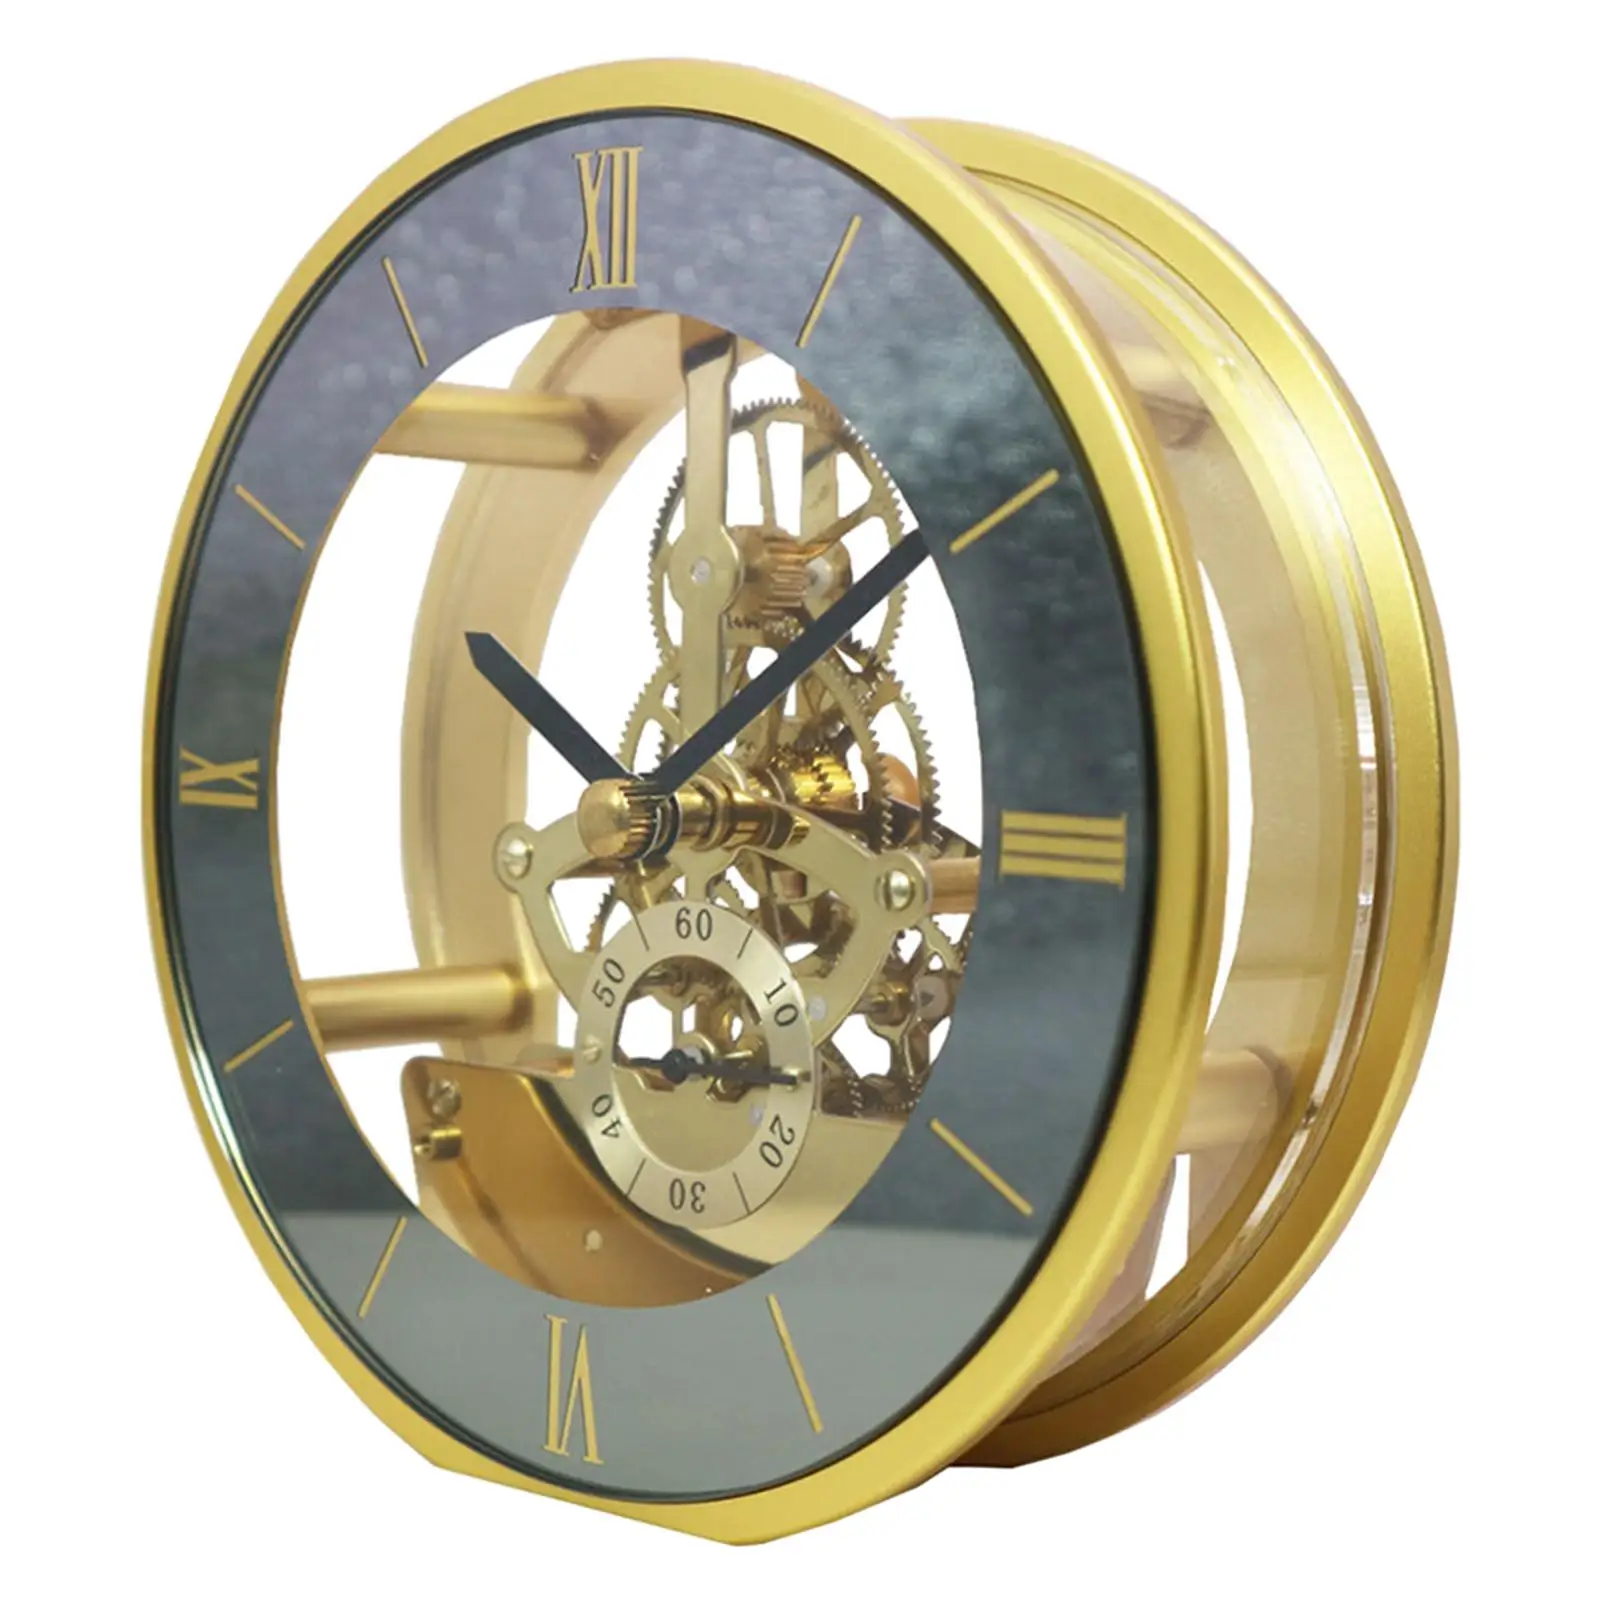 Table Clock Classic Anniversary Gift Antique Copper Aluminum Alloy Timepiece for Bedroom Home Bedroom Desk Shelf Bathroom Office